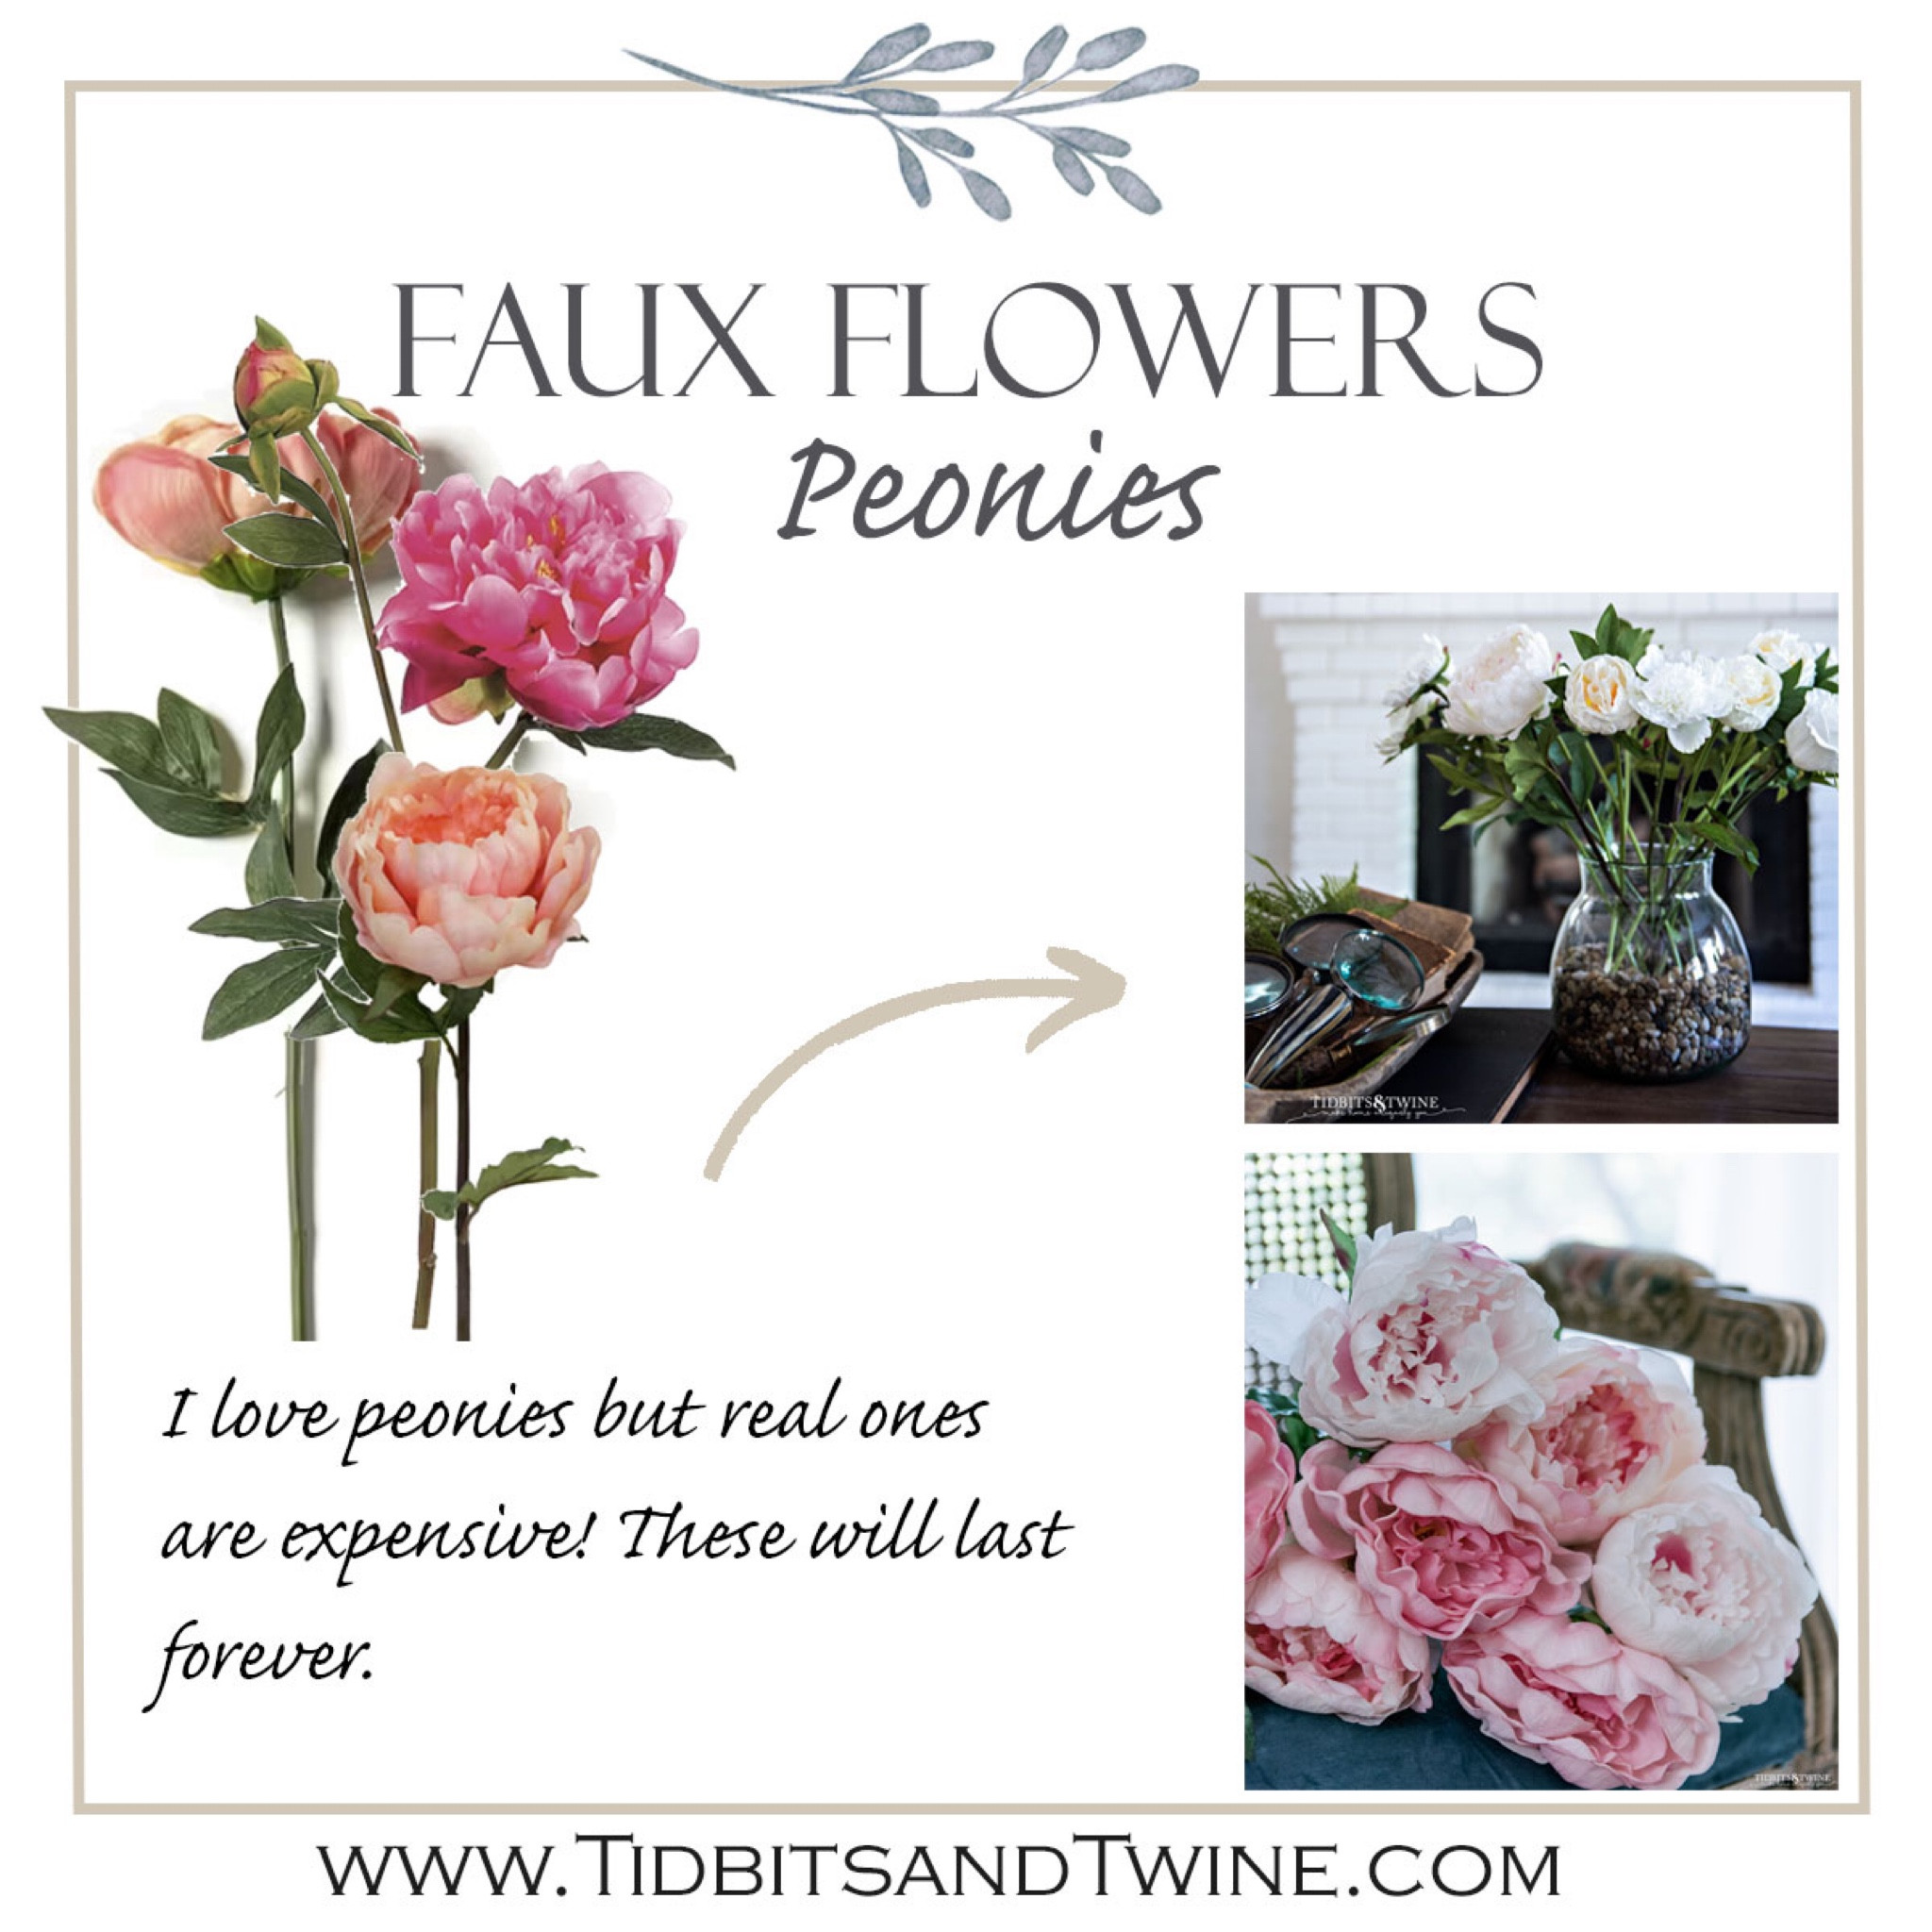 The Best Fake Flowers That Look Real - Tidbits&Twine